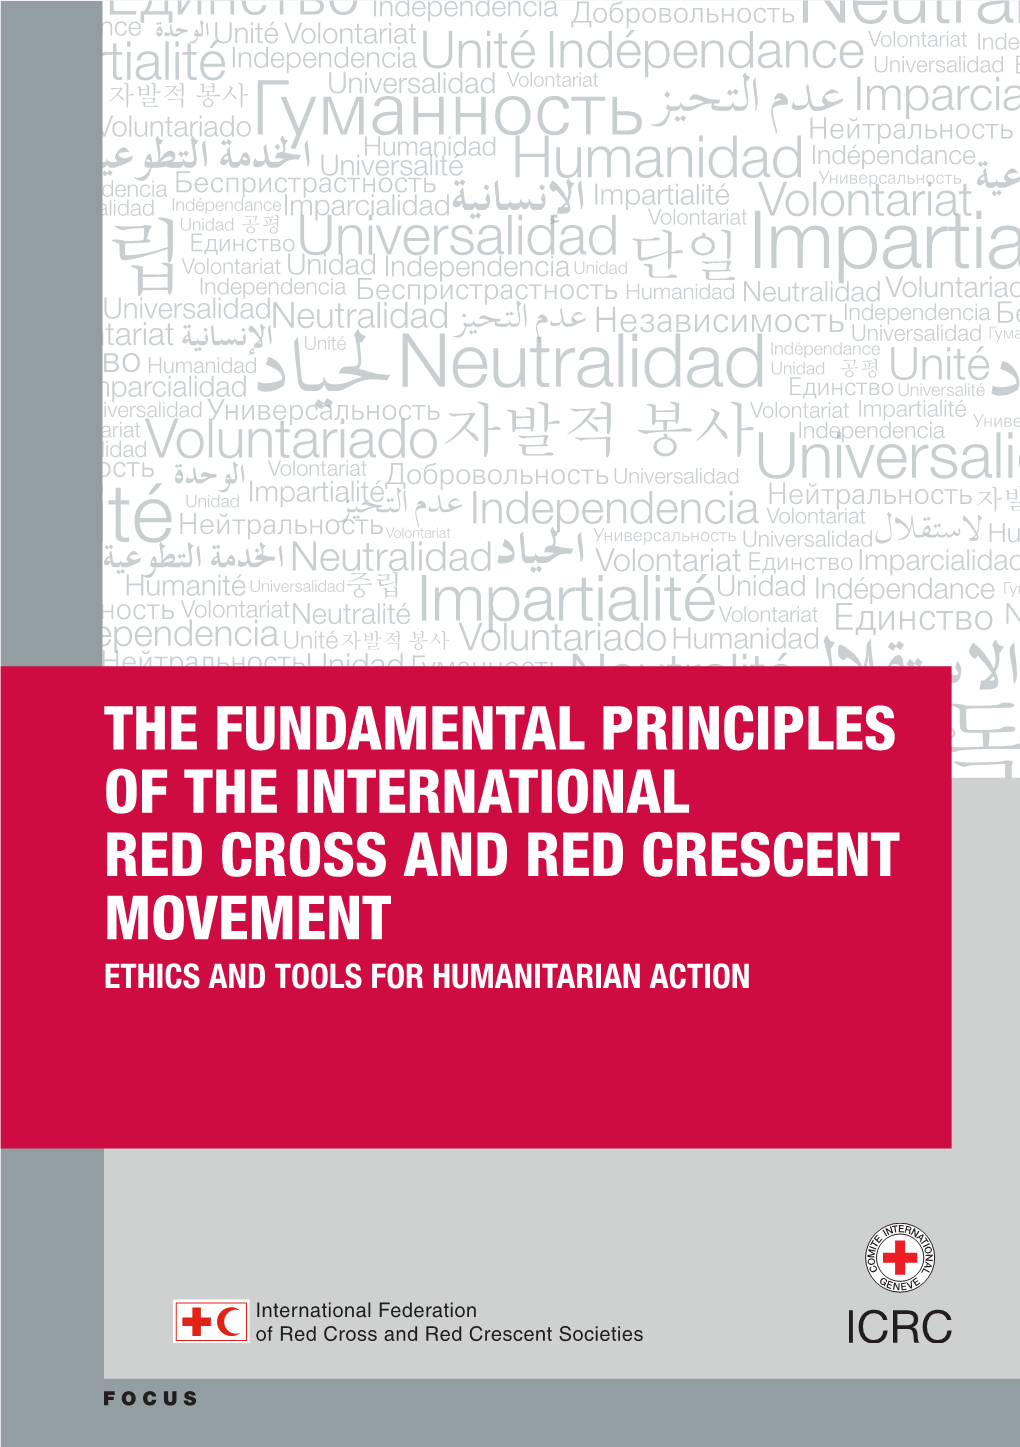 The Fundamental Principles of the Red Cross and Red Crescent, Commentary by Jean Pictet, ICRC Lawyer and Contributor to the Geneva Conventions of 1949